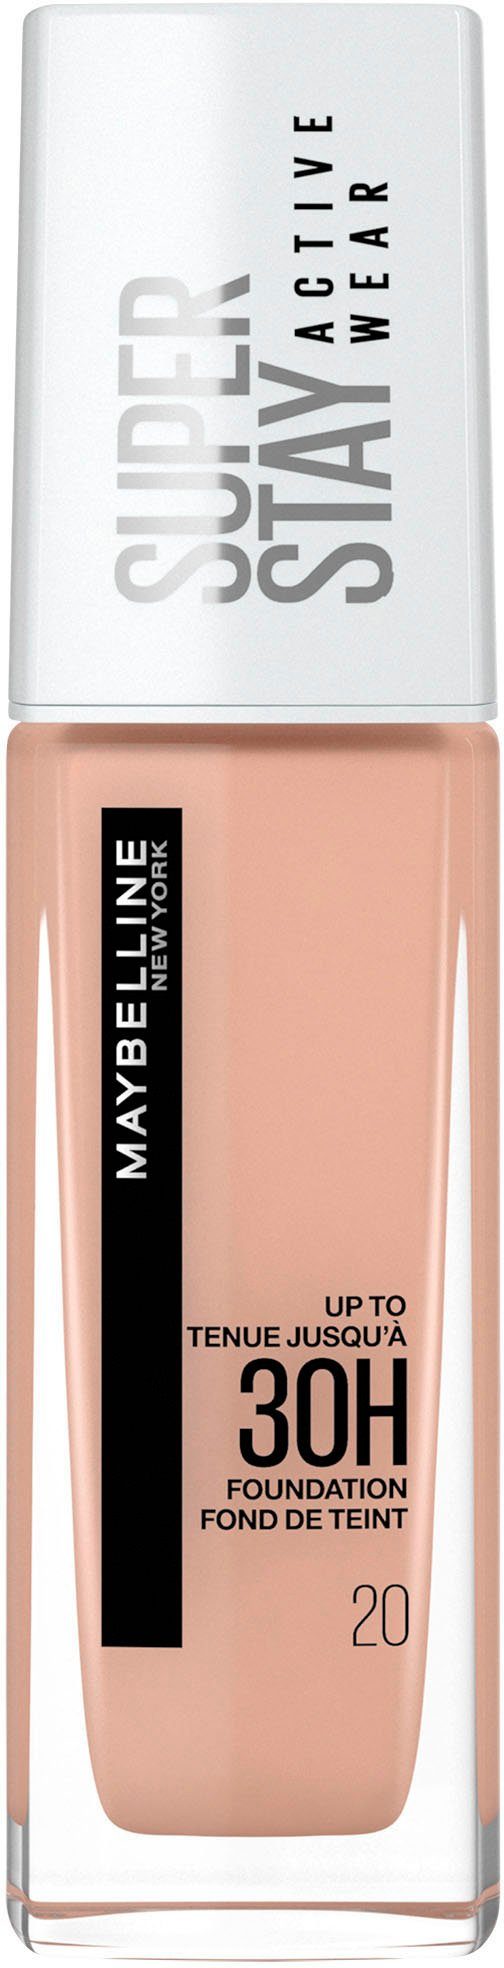 MAYBELLINE NEW 20 Cameo Foundation Wear Stay YORK Super Active